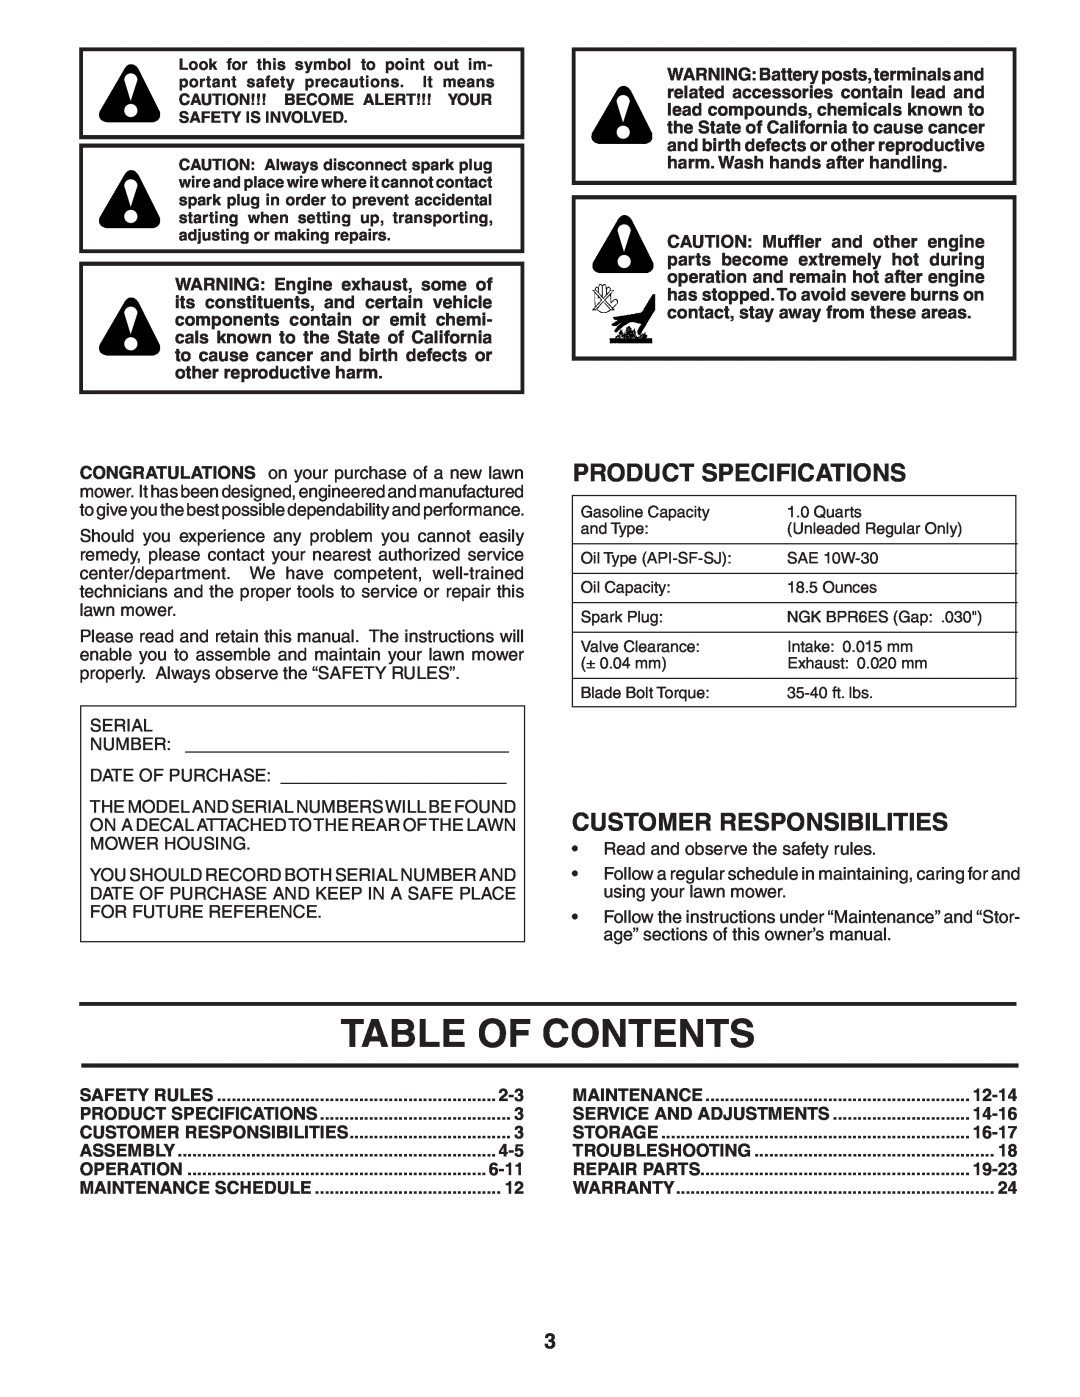 Husqvarna 65RSW21HV owner manual Table Of Contents, Product Specifications, Customer Responsibilities 